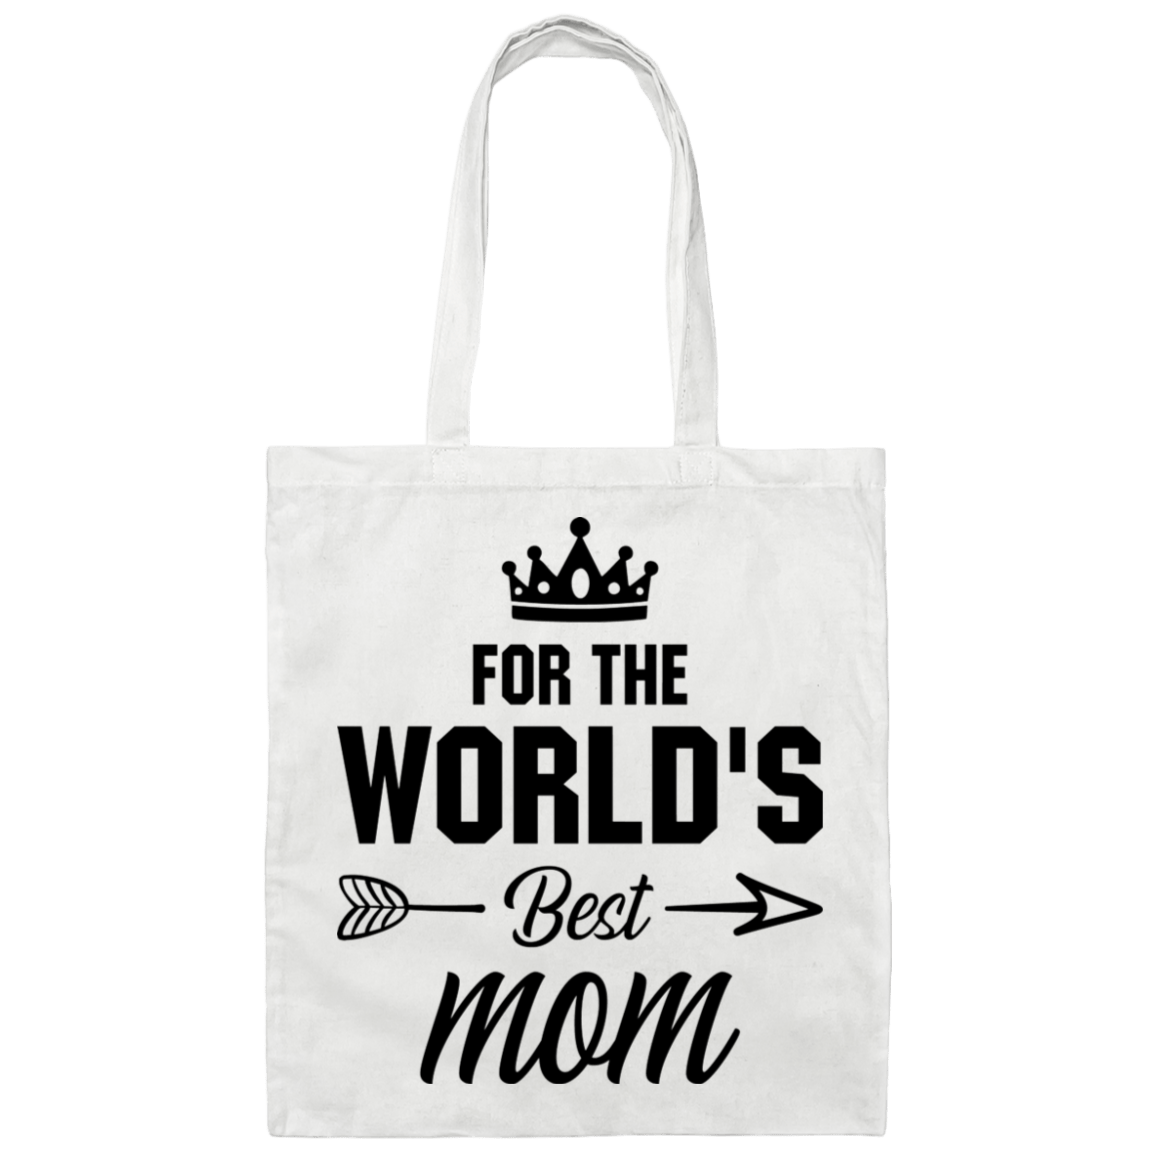 World's Best Mom Canvas Tote Bag